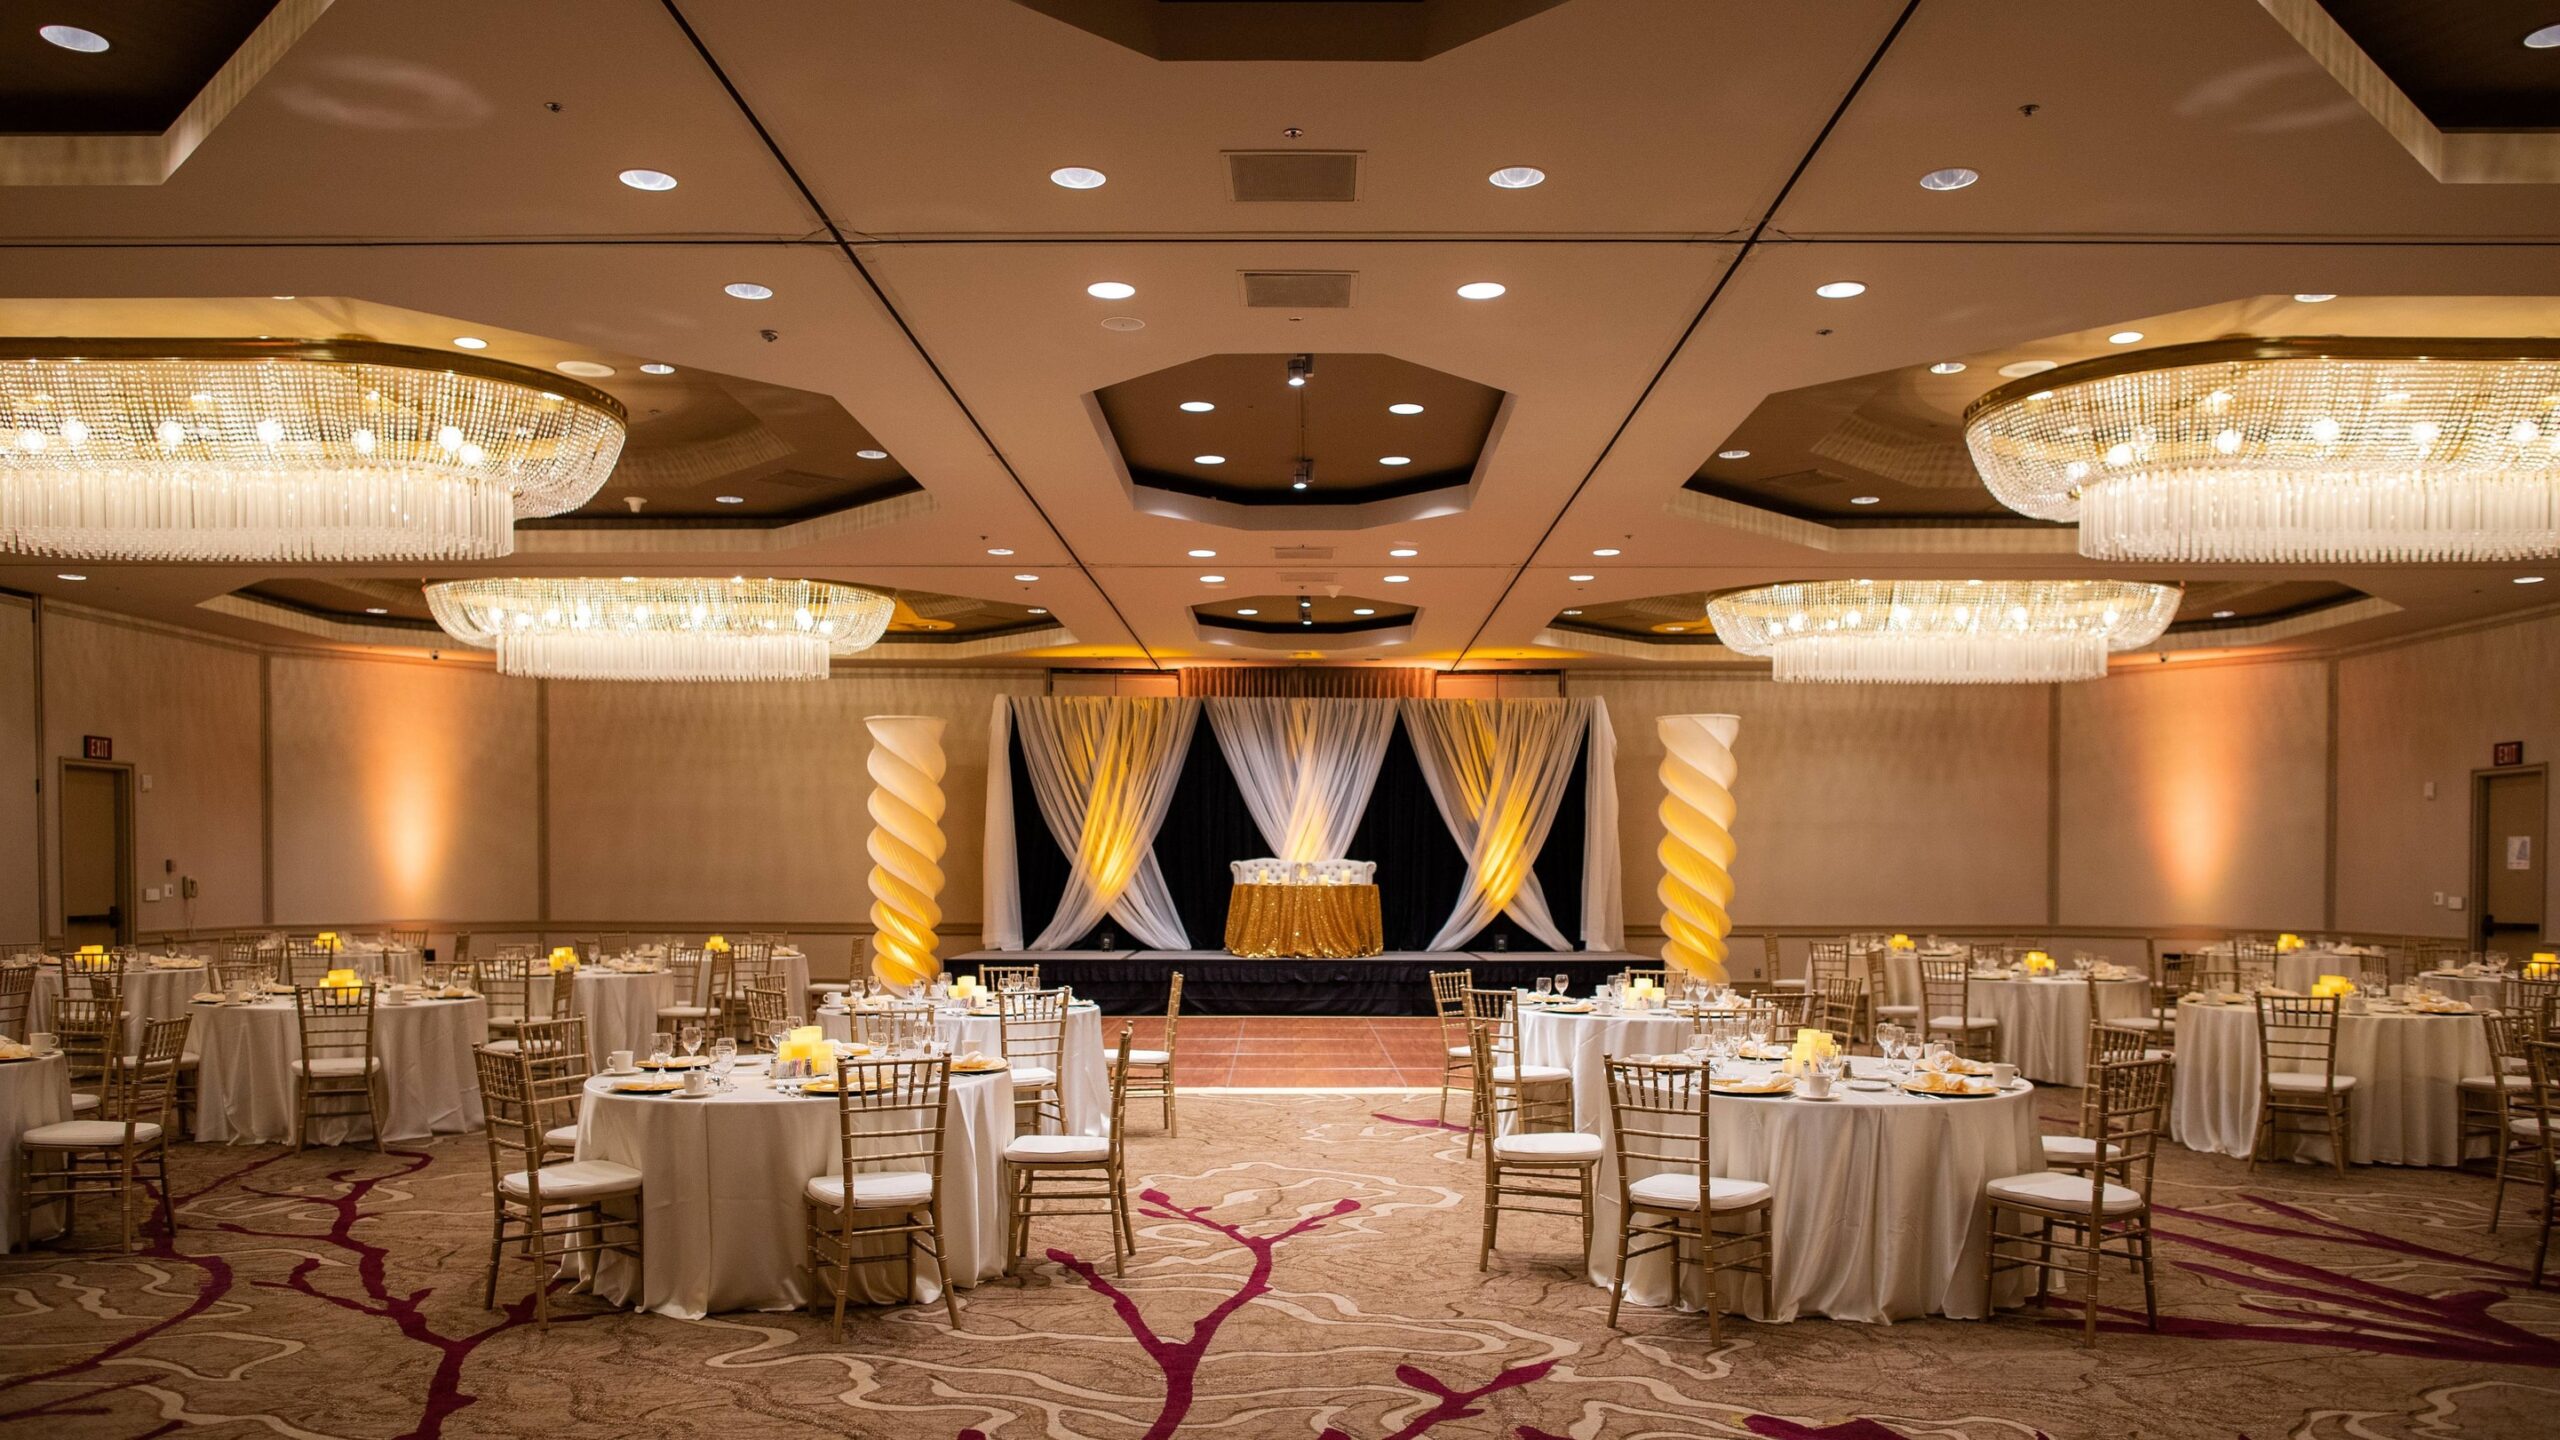 Large ballroom draped in warm lighting. Tables covered with white lines and adorned with yellow candles and yellow place setting chargers.